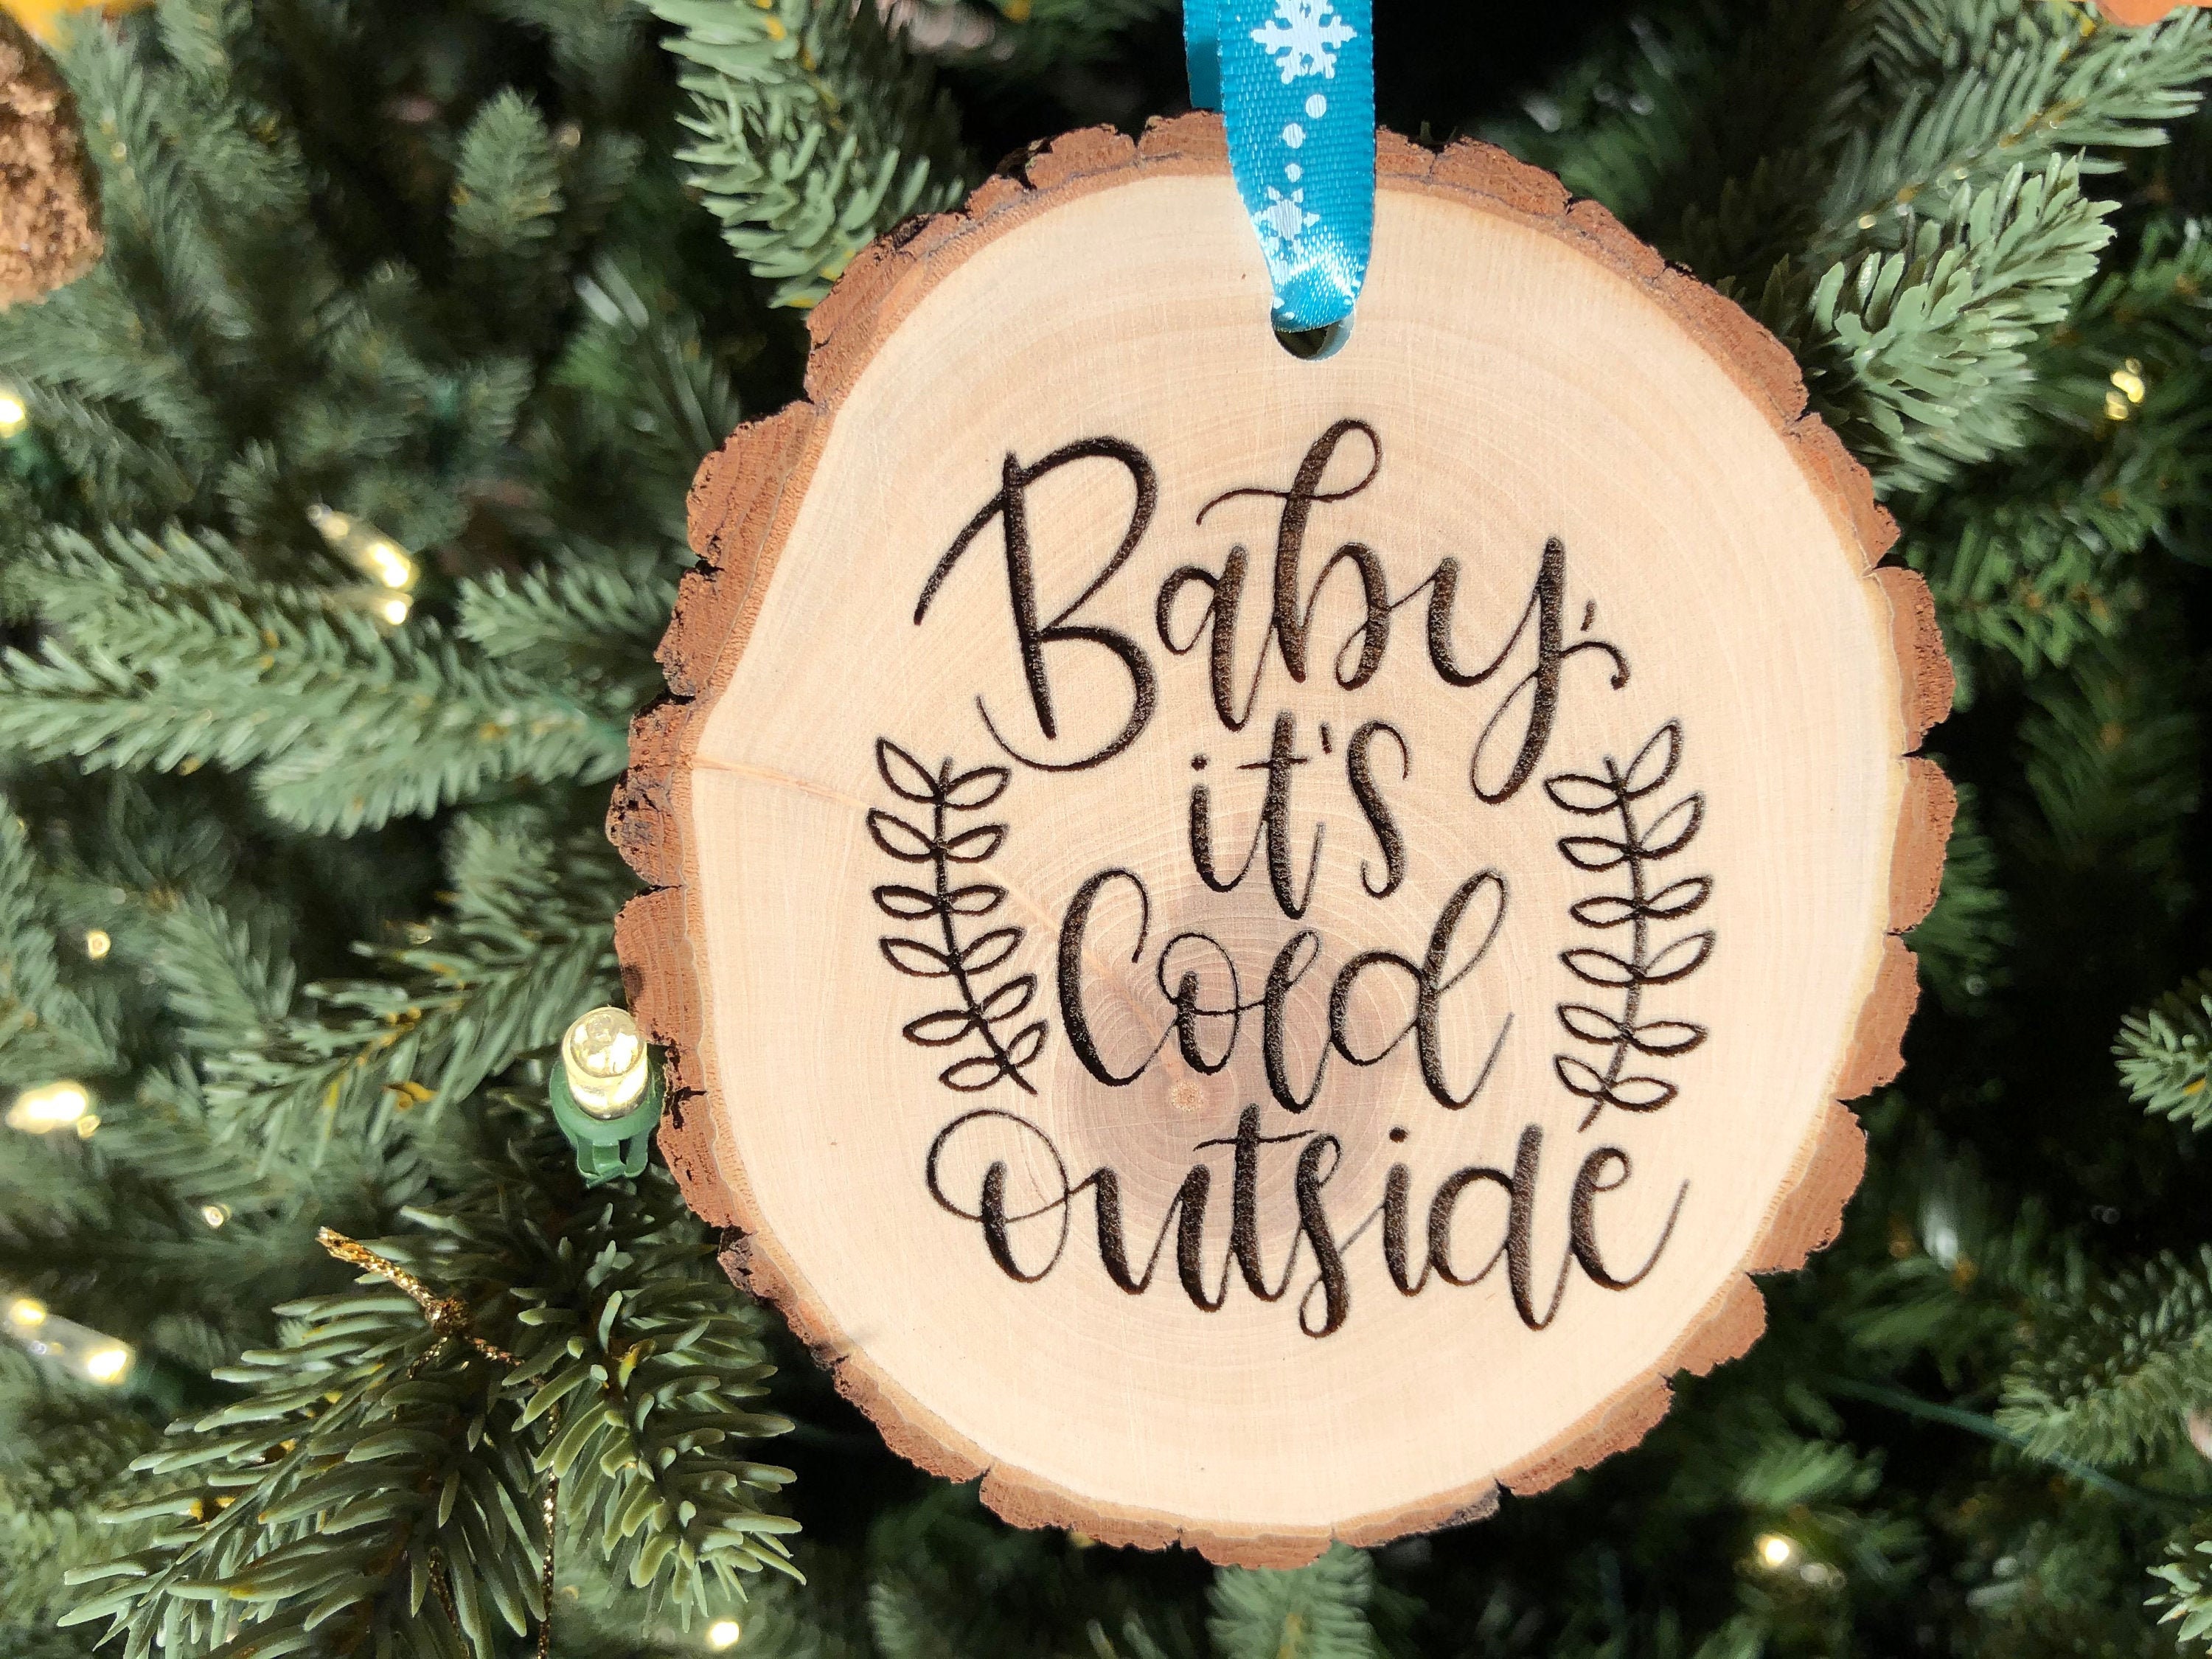 NEW WOODEN CHRISTMAS ORNAMENT SEASONAL DOOR DECOR "BABY IT'S COLD OUTSIDE" 